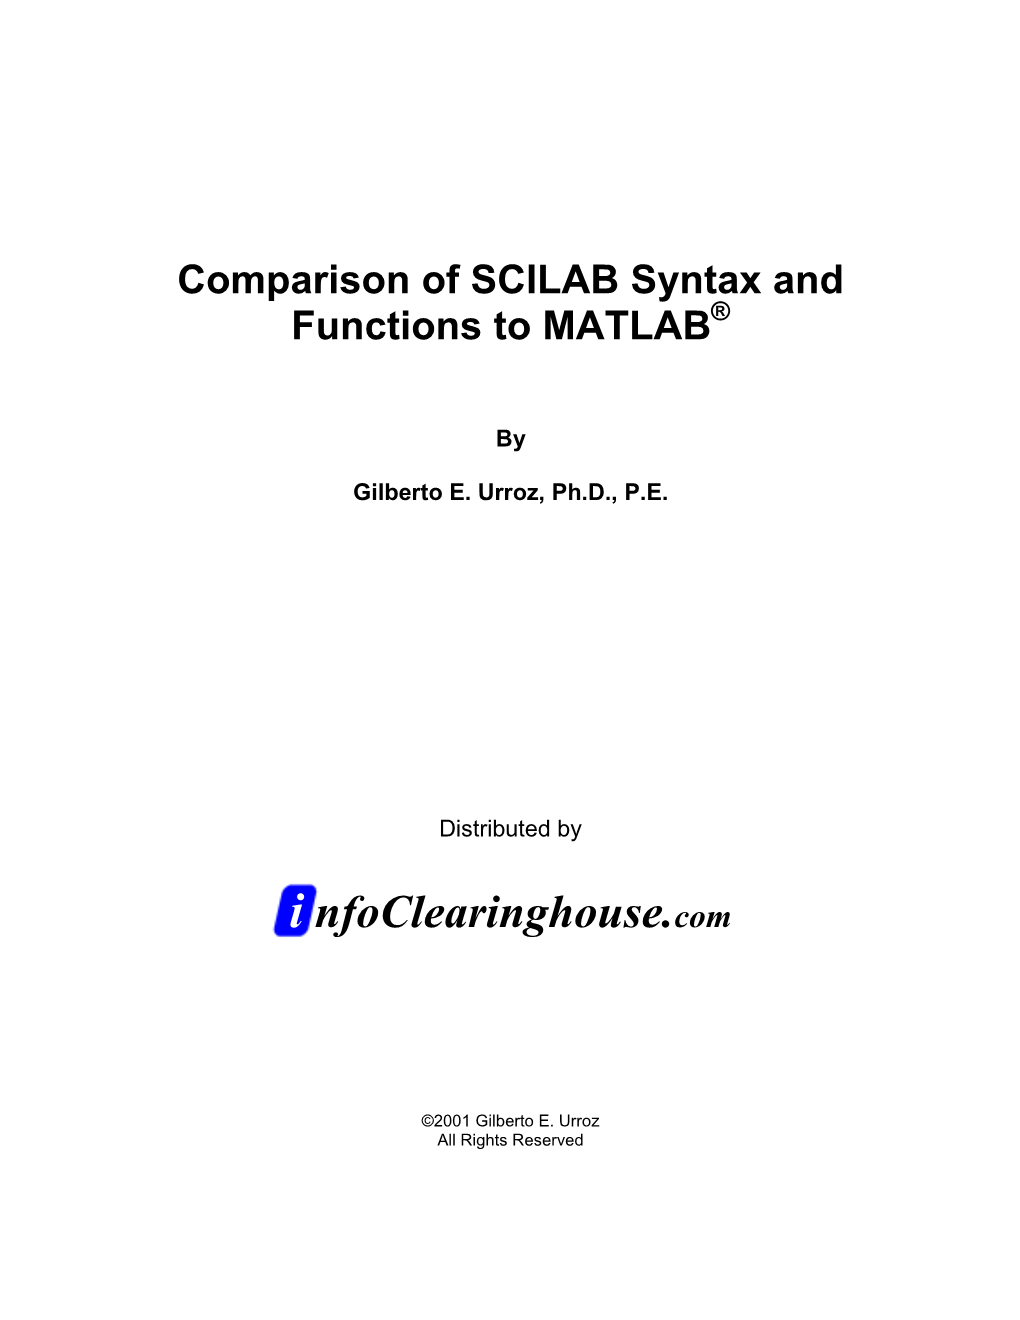 Comparison of SCILAB Syntax and Functions to MATLAB®